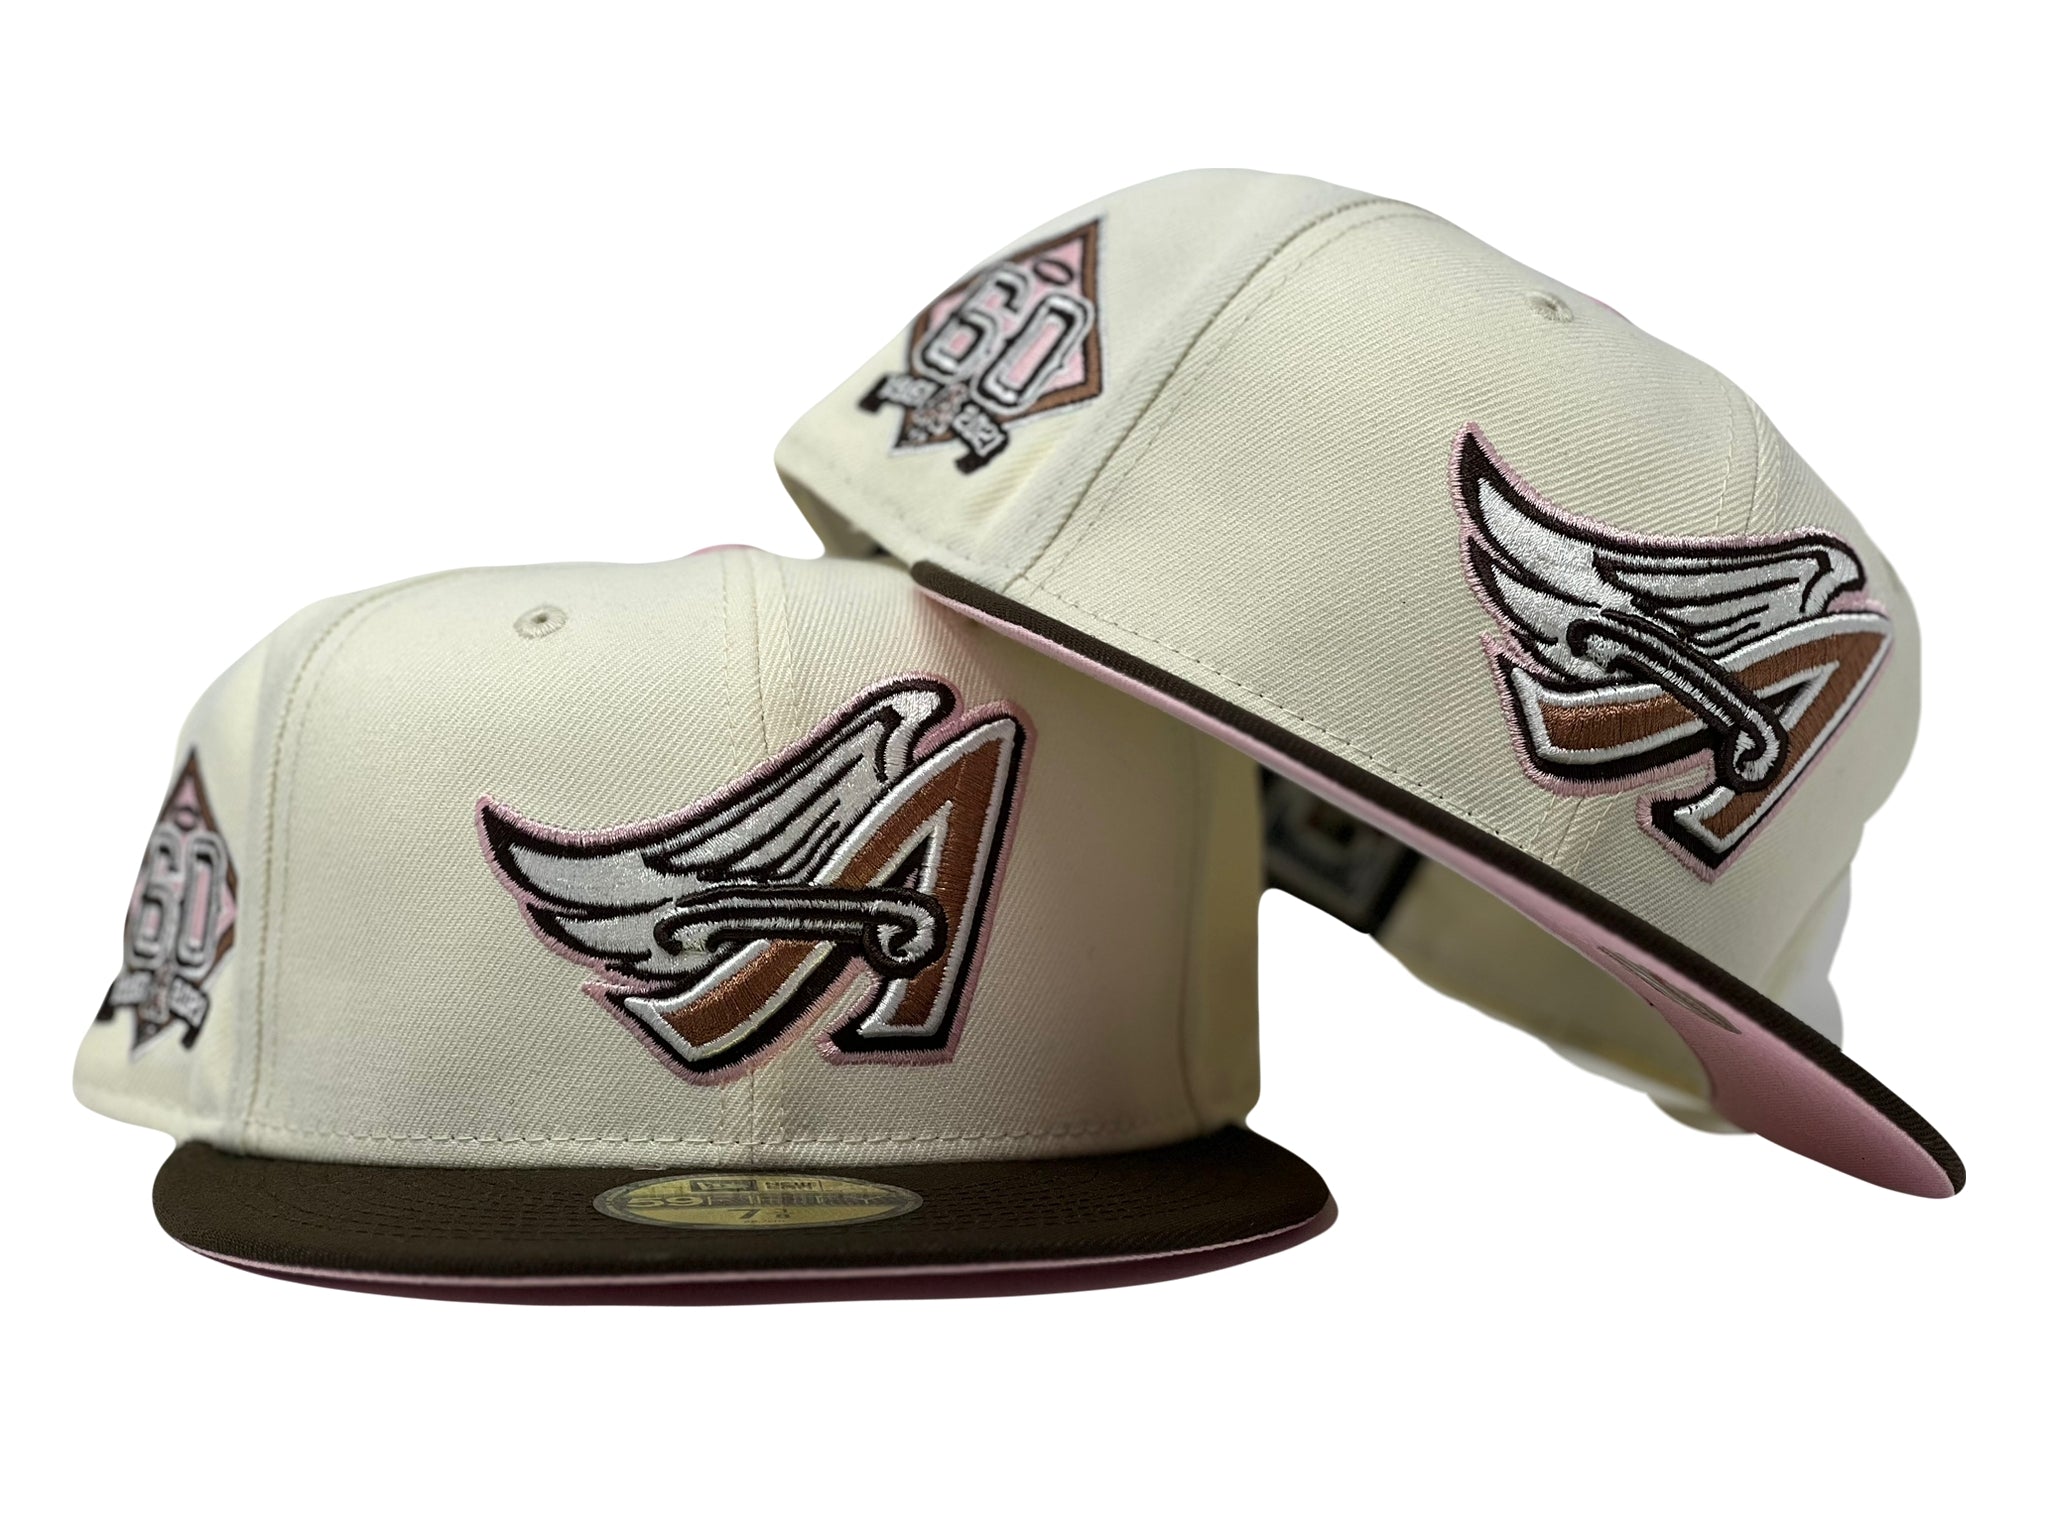 Anaheim Angels A City Connect New Era 59Fifty Fitted Hat (Chrome